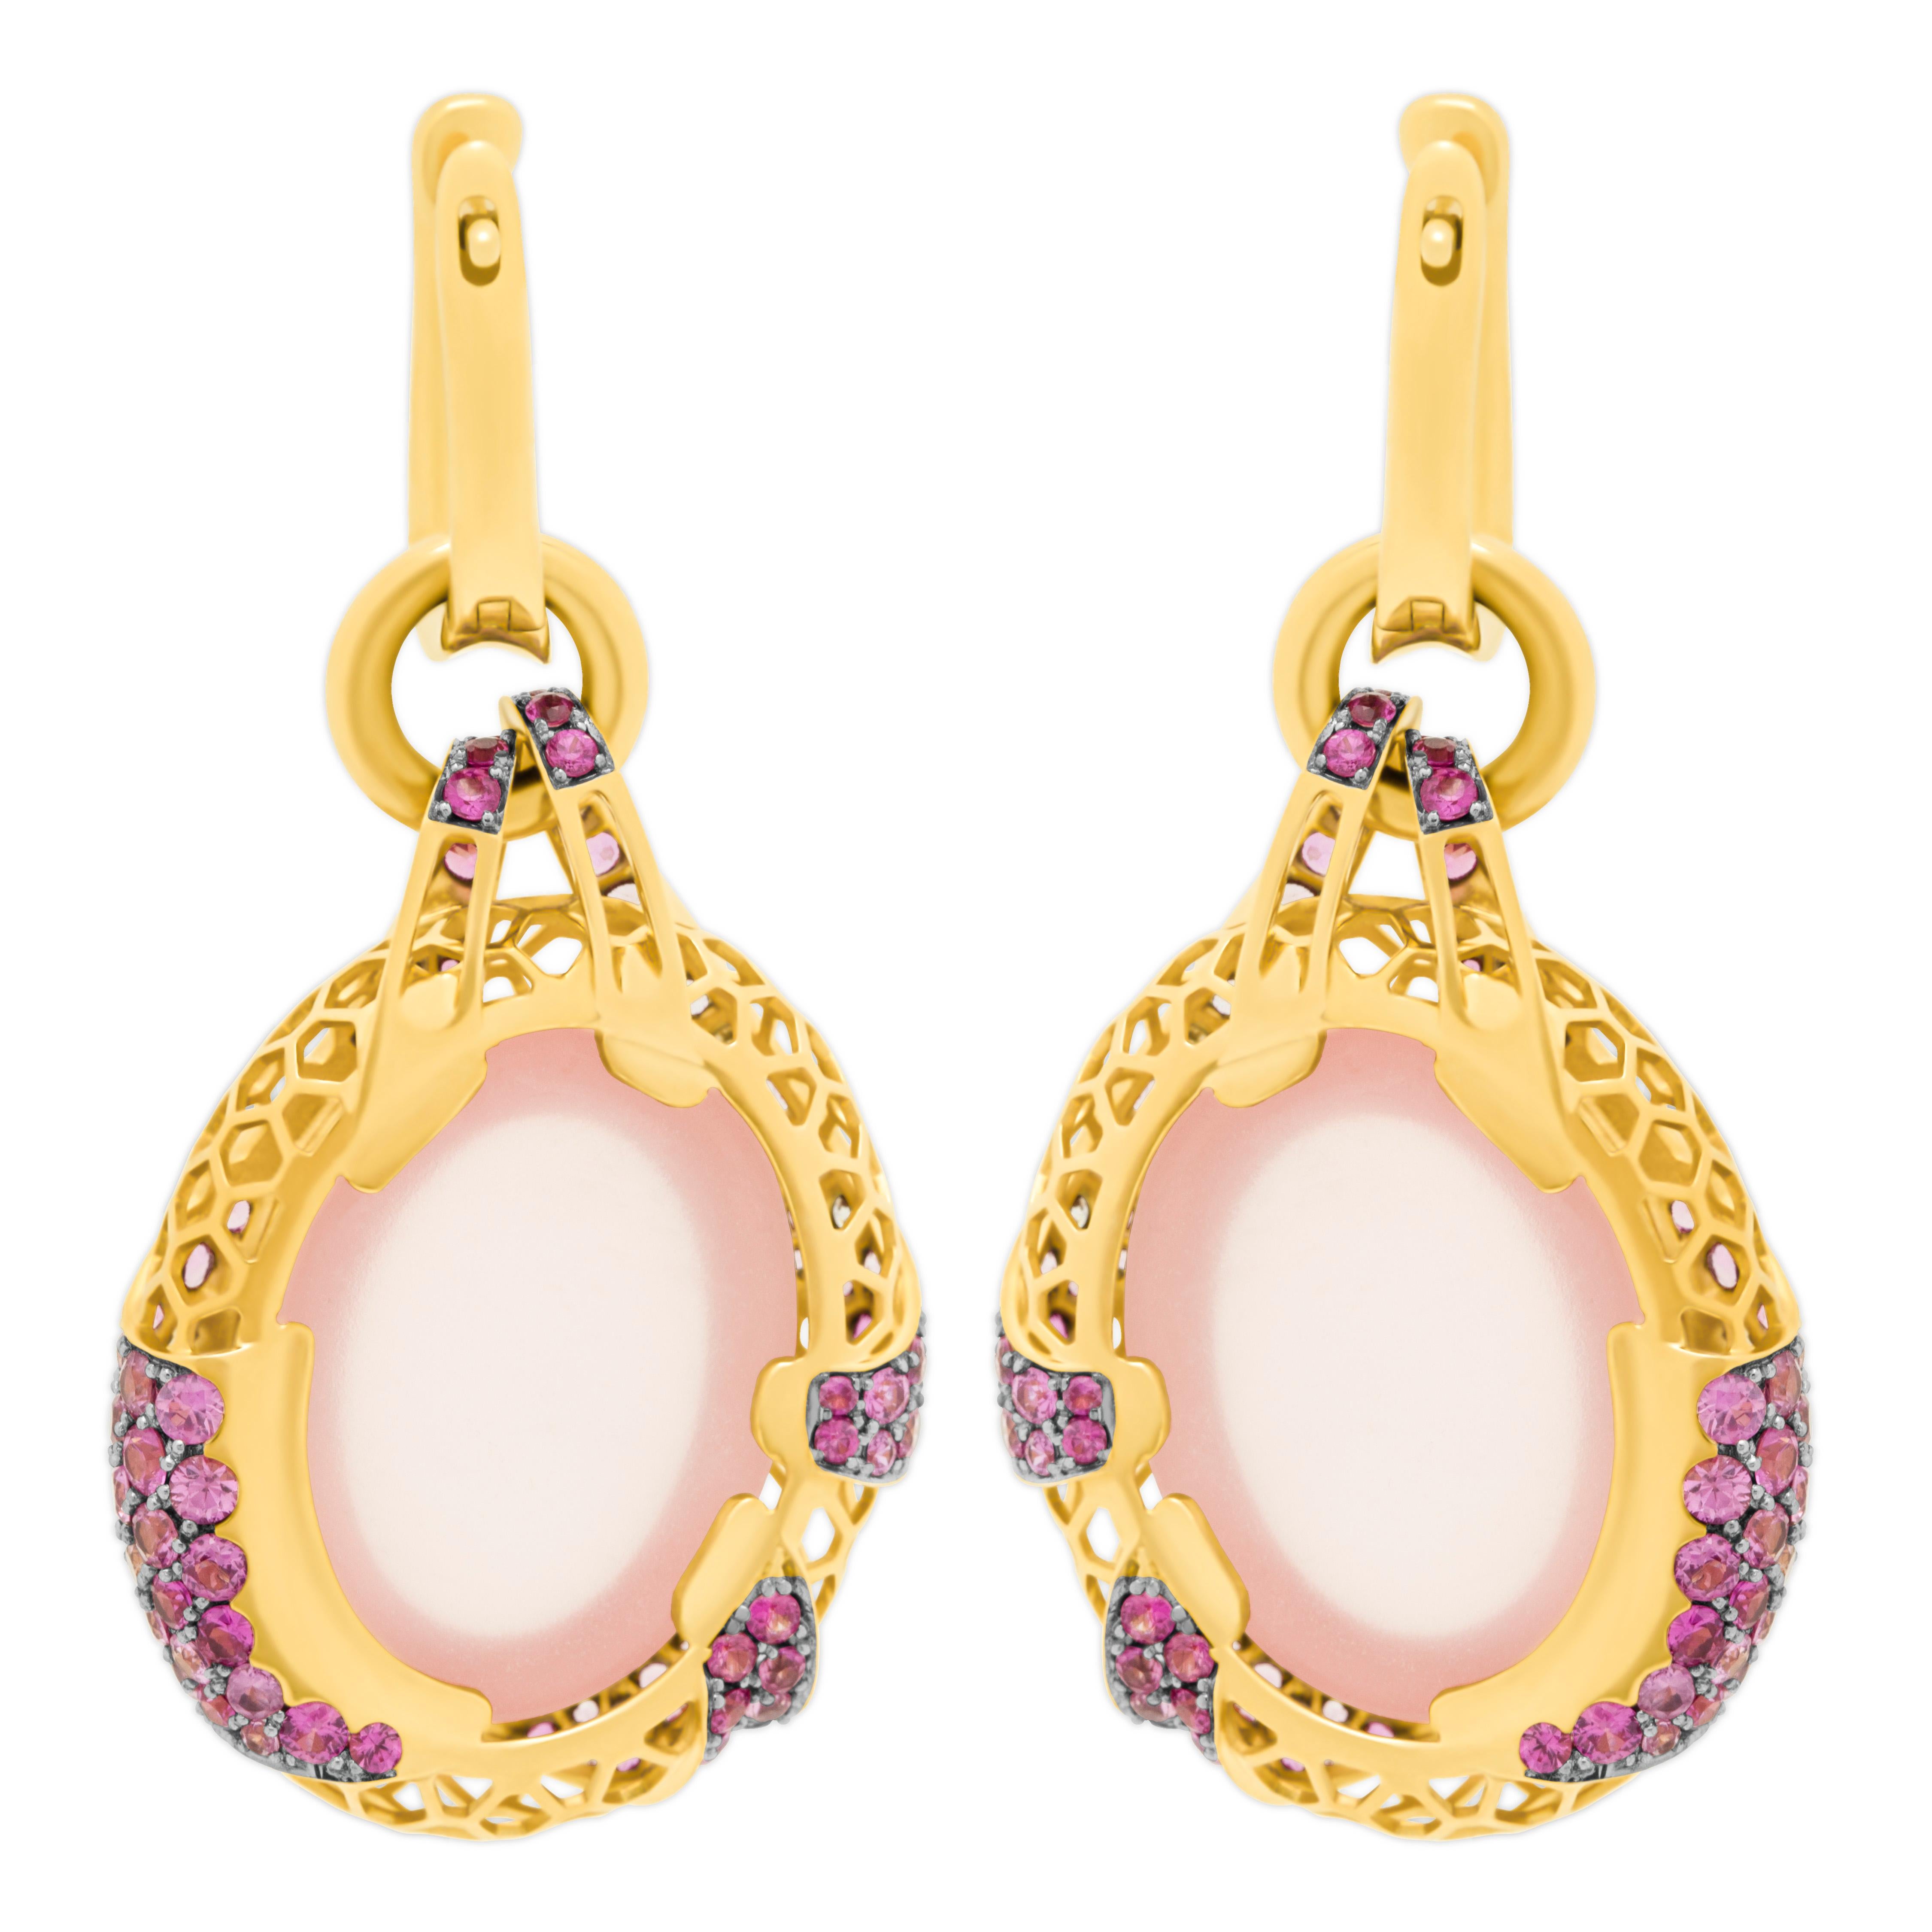 Rose Quartz 33.34 Carat Diamonds Pink Sapphires 18 Karat Yellow Gold Earrings
What kind of patterns has not been created by nature. Honeycomb is one of them. Take a look at our 18 Karat Yellow Gold Earrings from the New Age collection, it perfectly